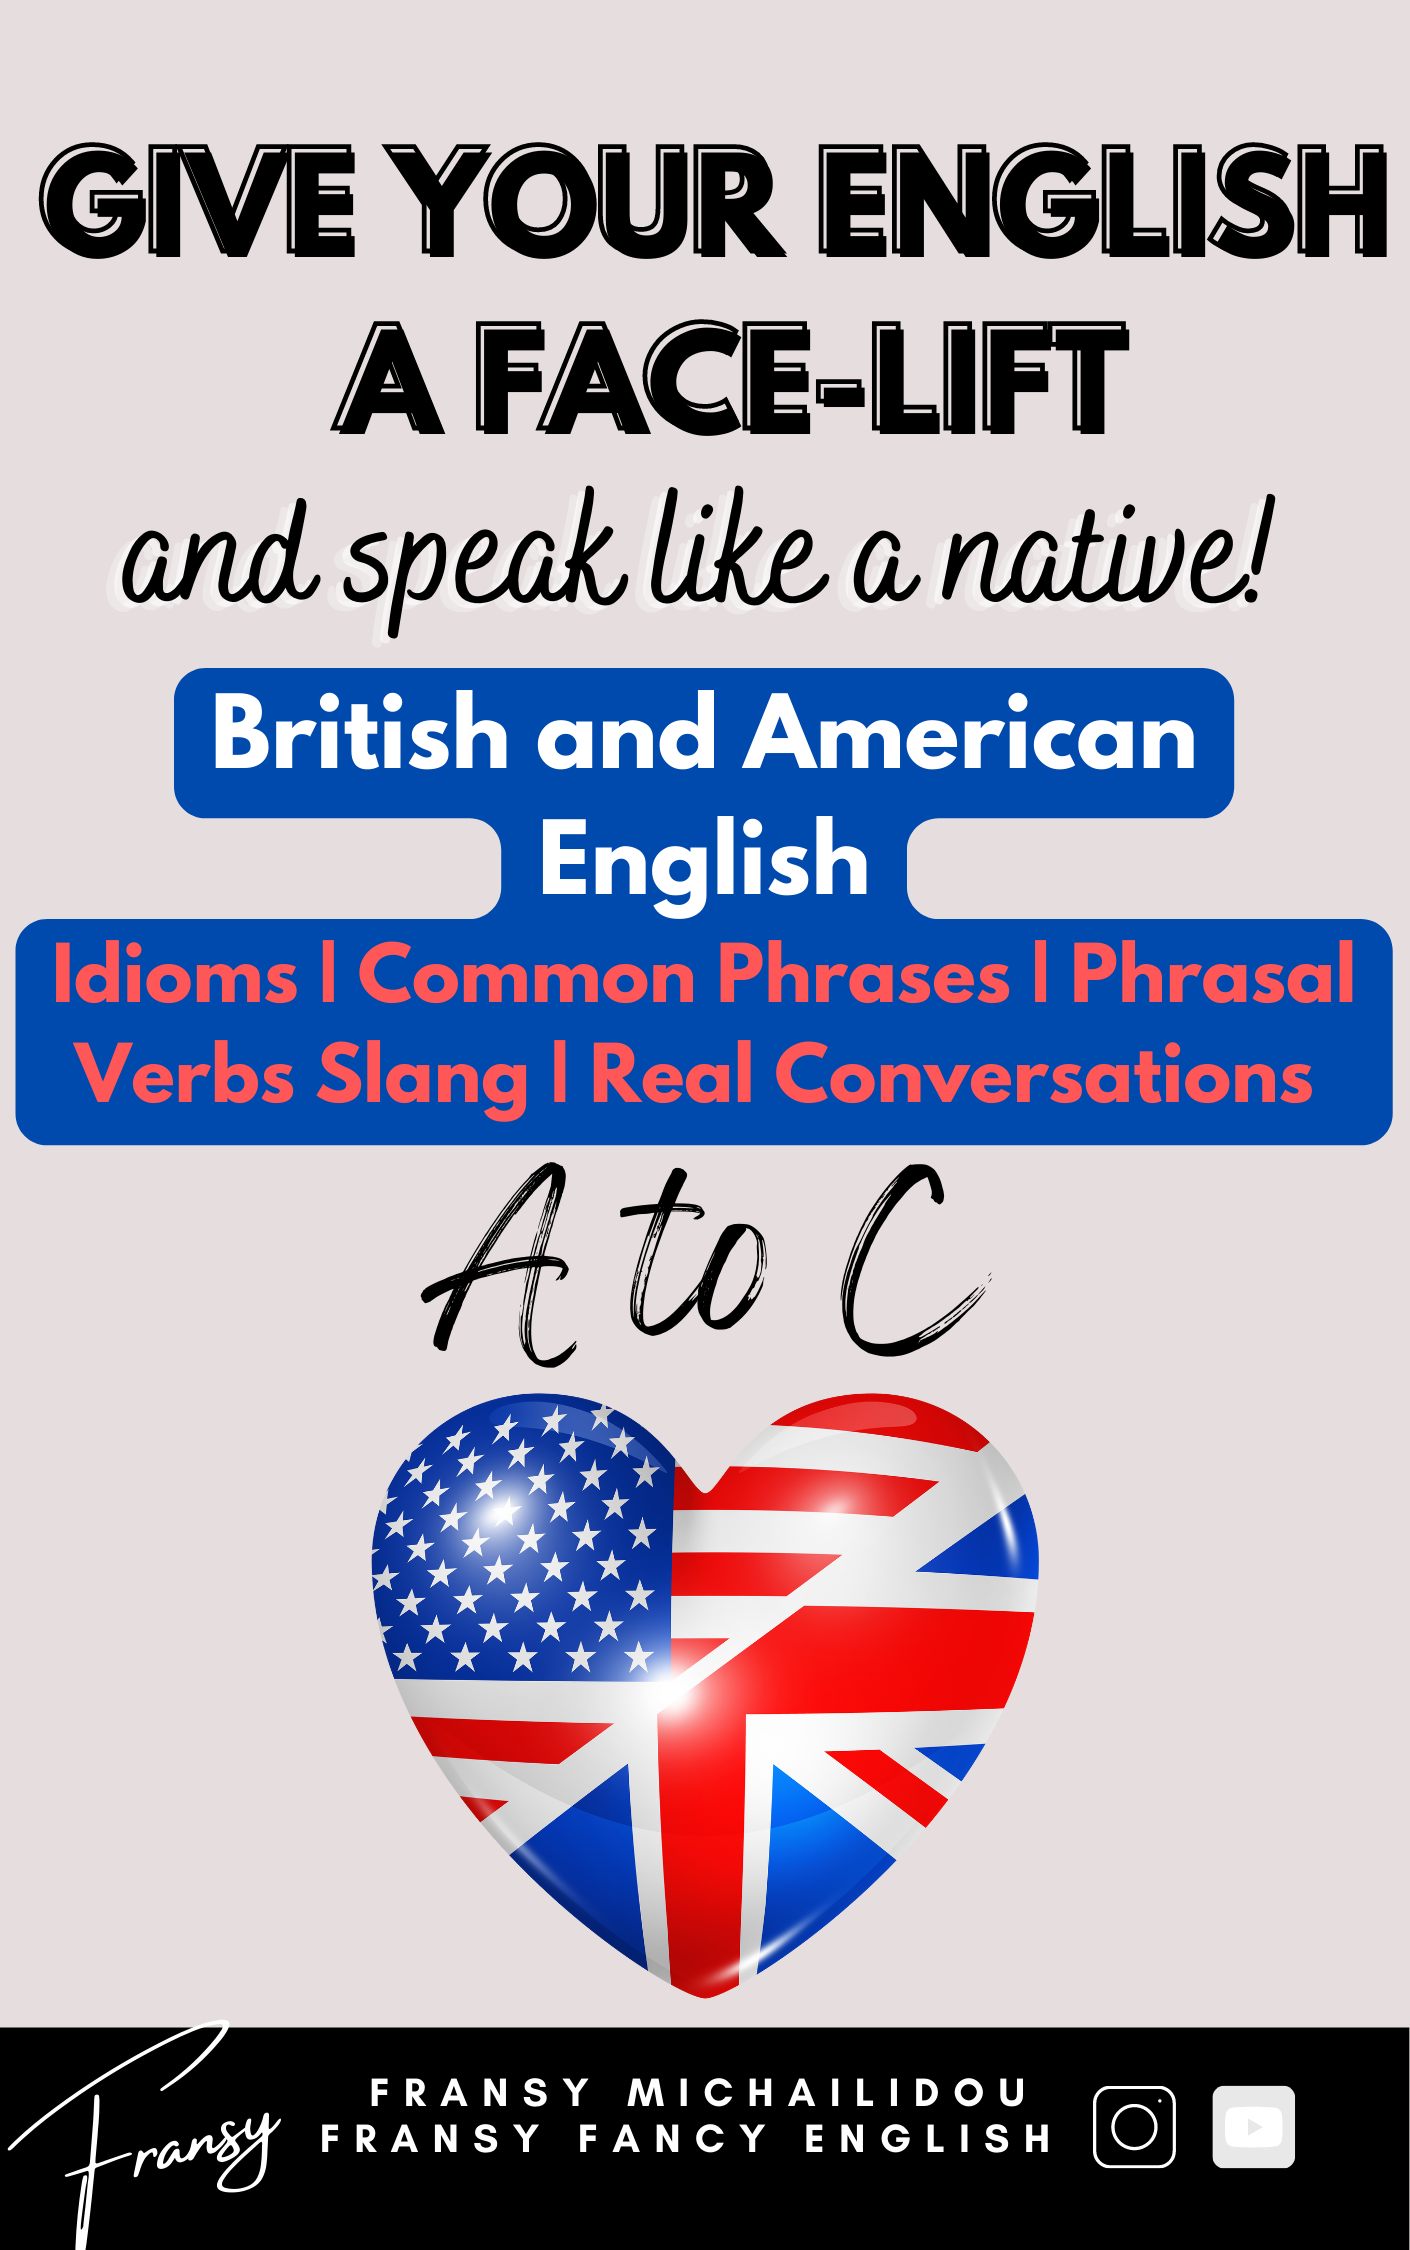 Modernize your English and learn what natives use in their day-to-day conversations!